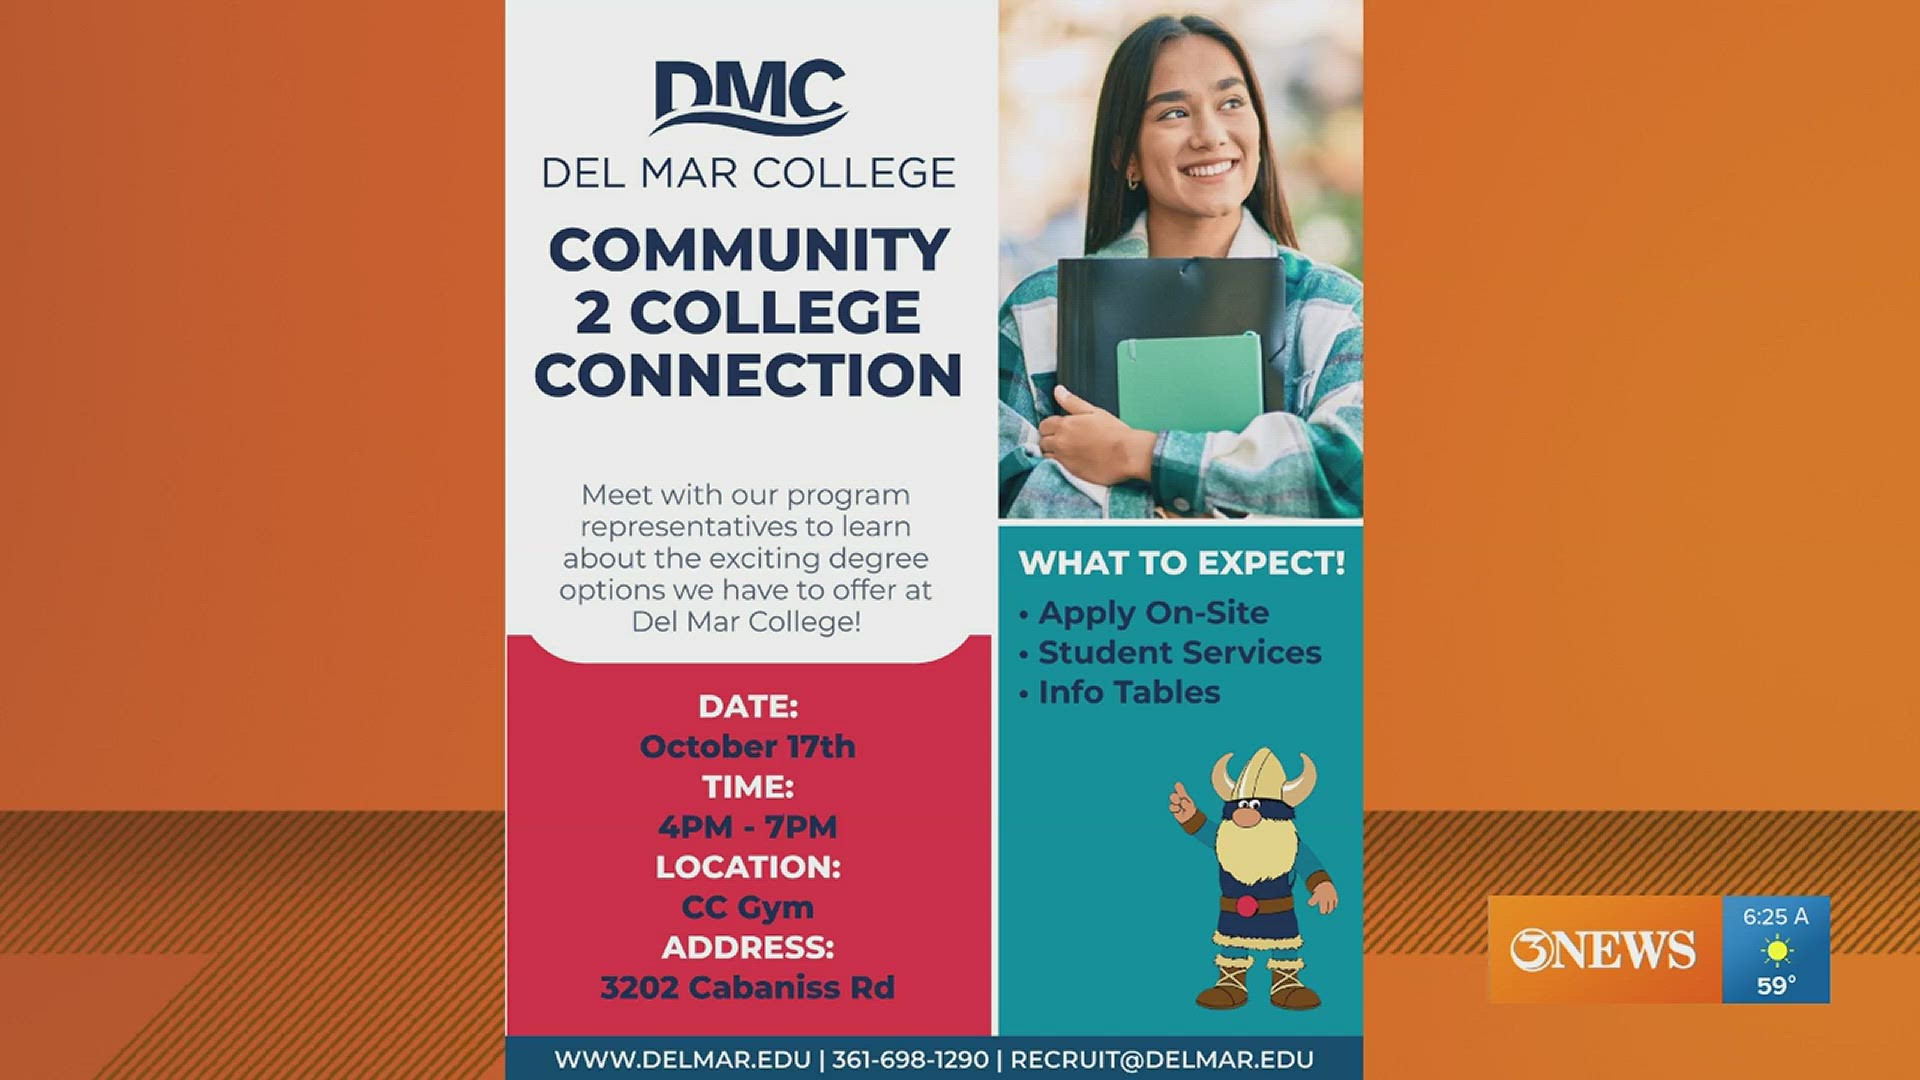 The "Community 2 College Connection" event Oct. 17 will offer the community a chance to explore higher education opportunities at Del Mar College.